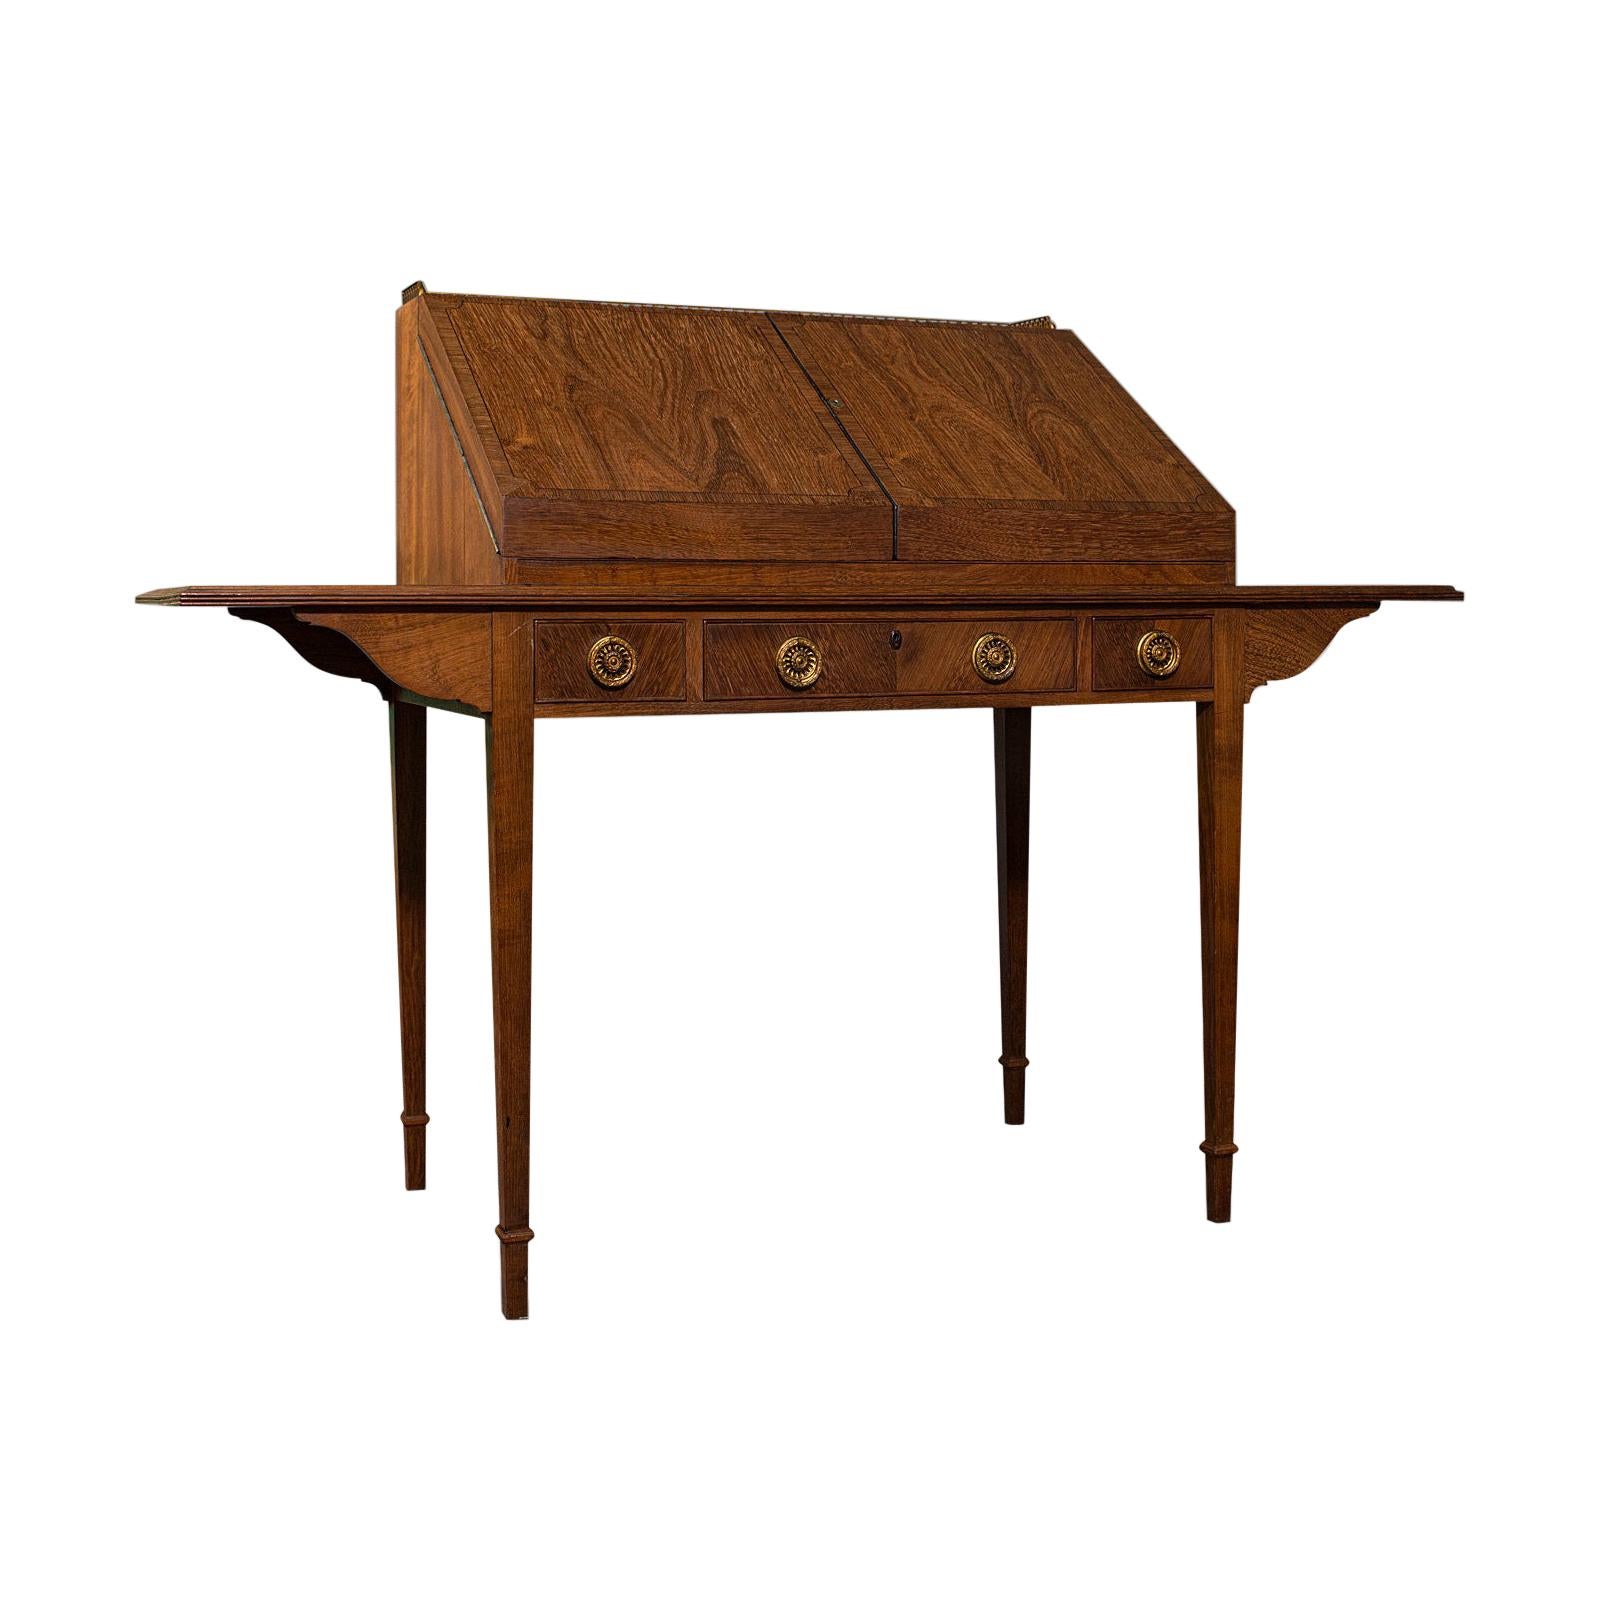 Antique Correspondence Desk, English, Library, Writing Table, Cotswold School